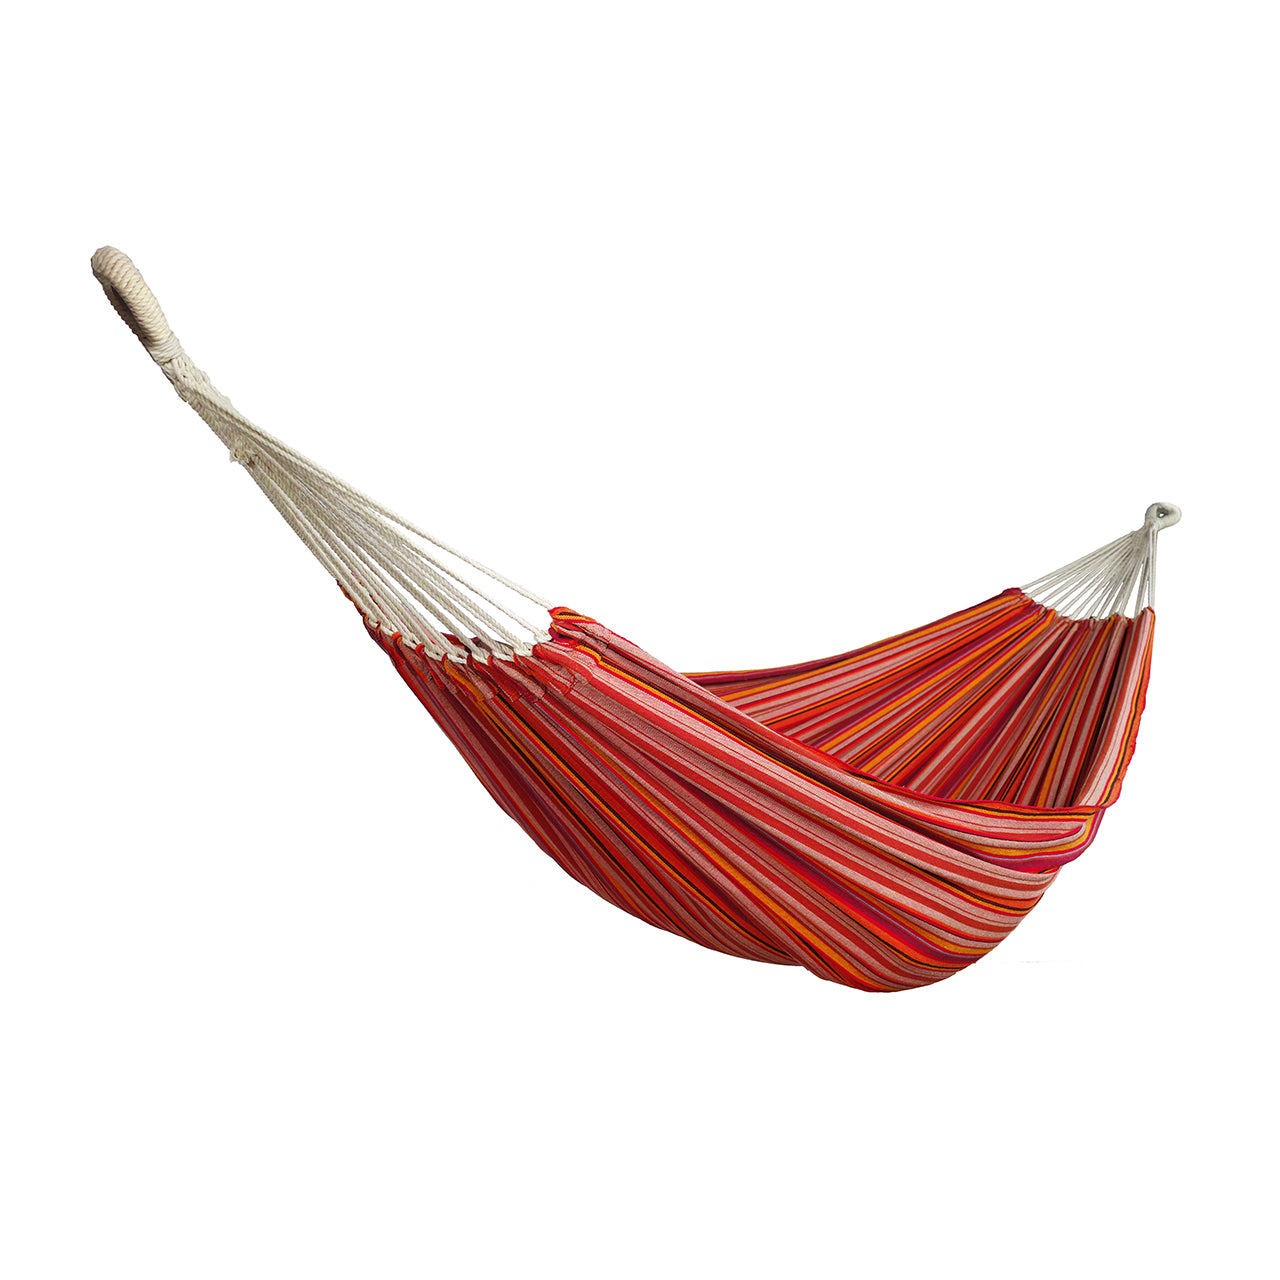 Bliss Hammocks 60-inch Wide Double Hammock in a Bag with Hand-woven Rope loops in the Toasted almond Stripe variation.